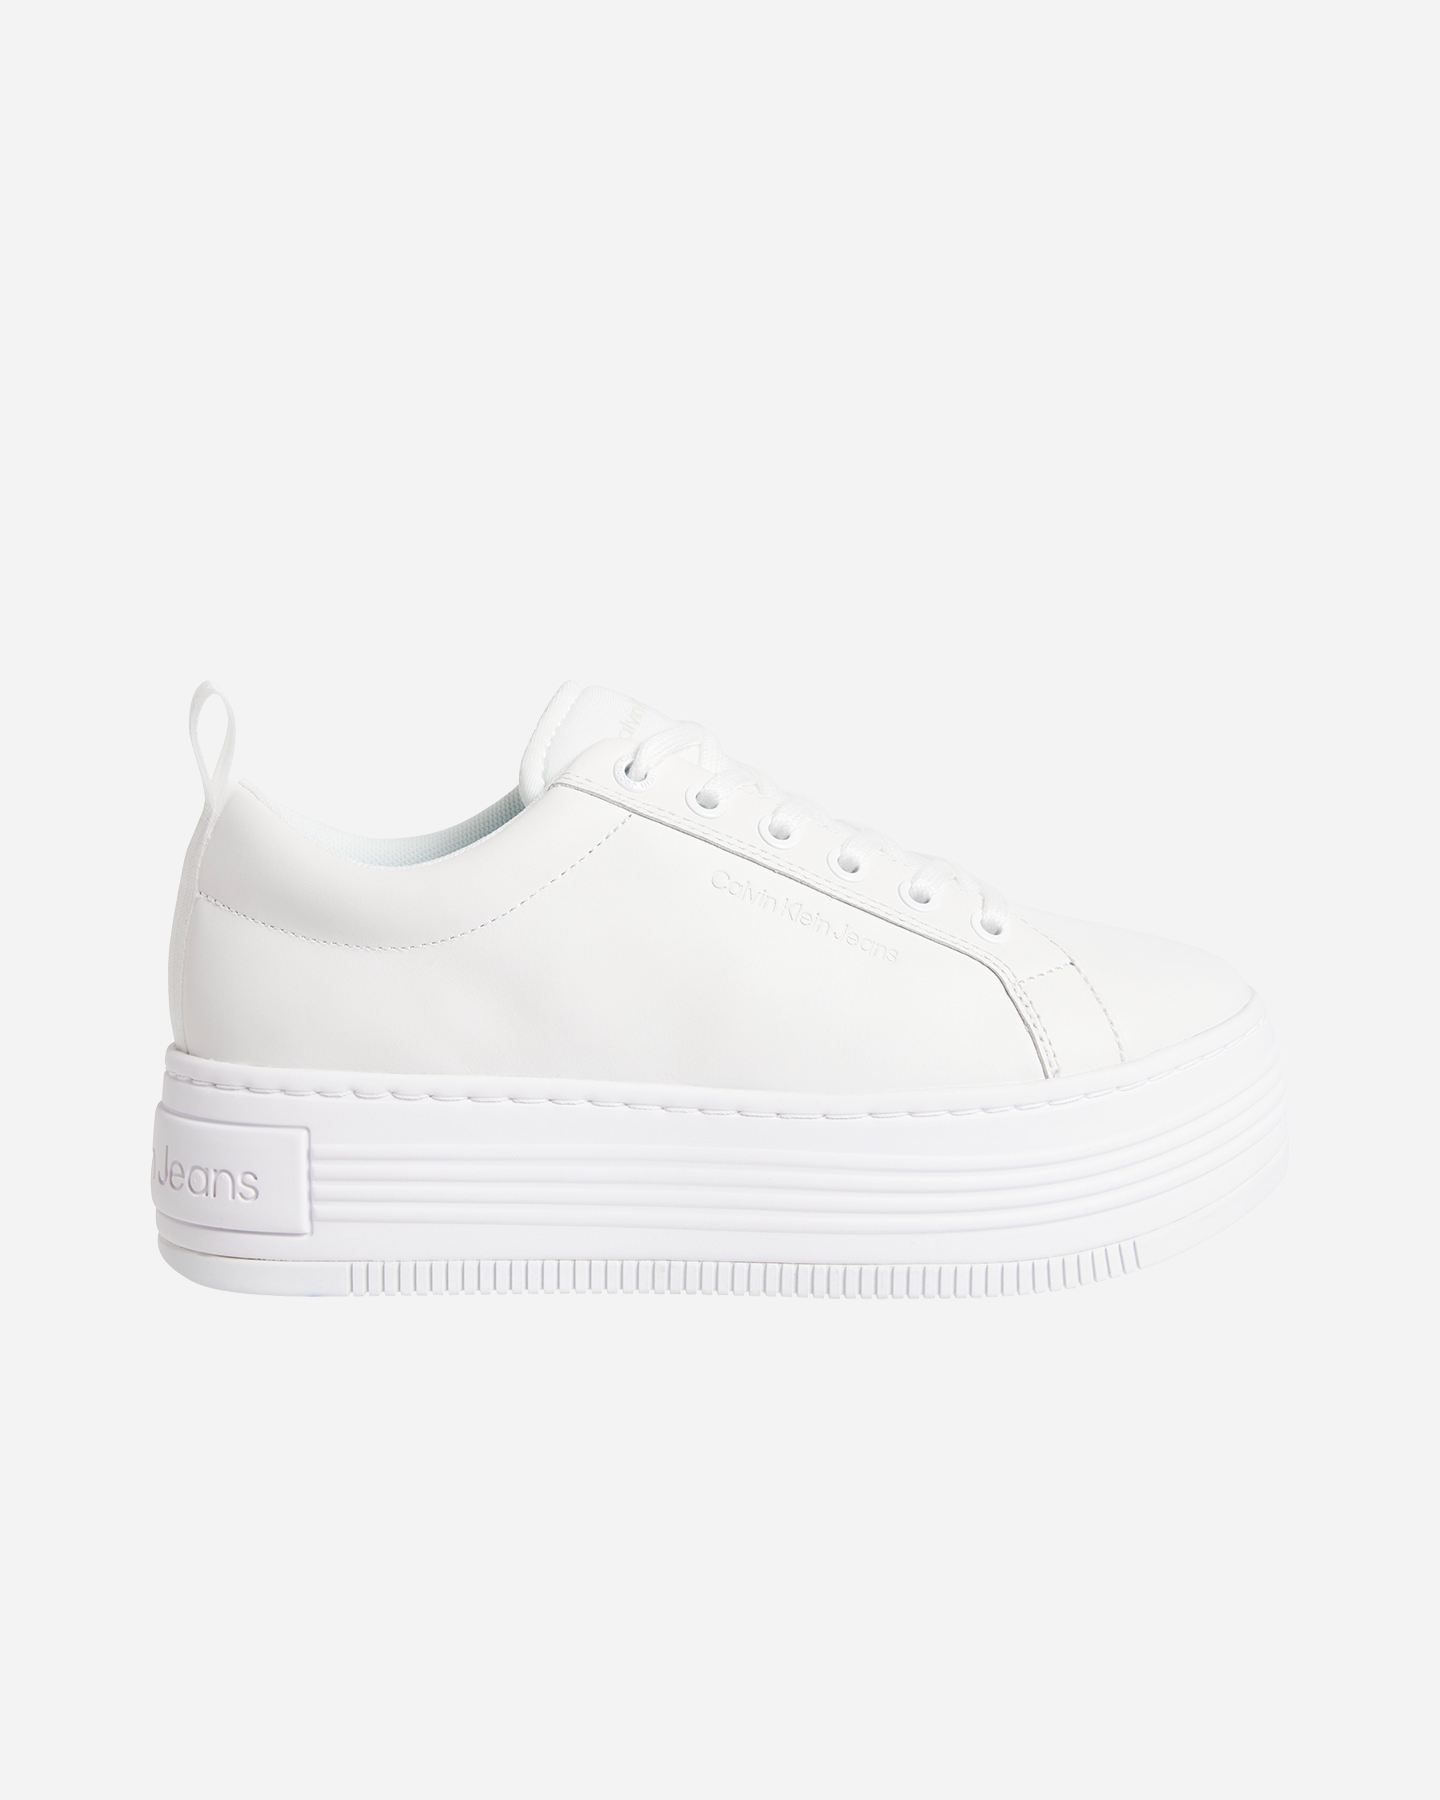 Image of Calvin Klein Jeans Bold Flatf Low Lth W - Scarpe Sneakers - Donna